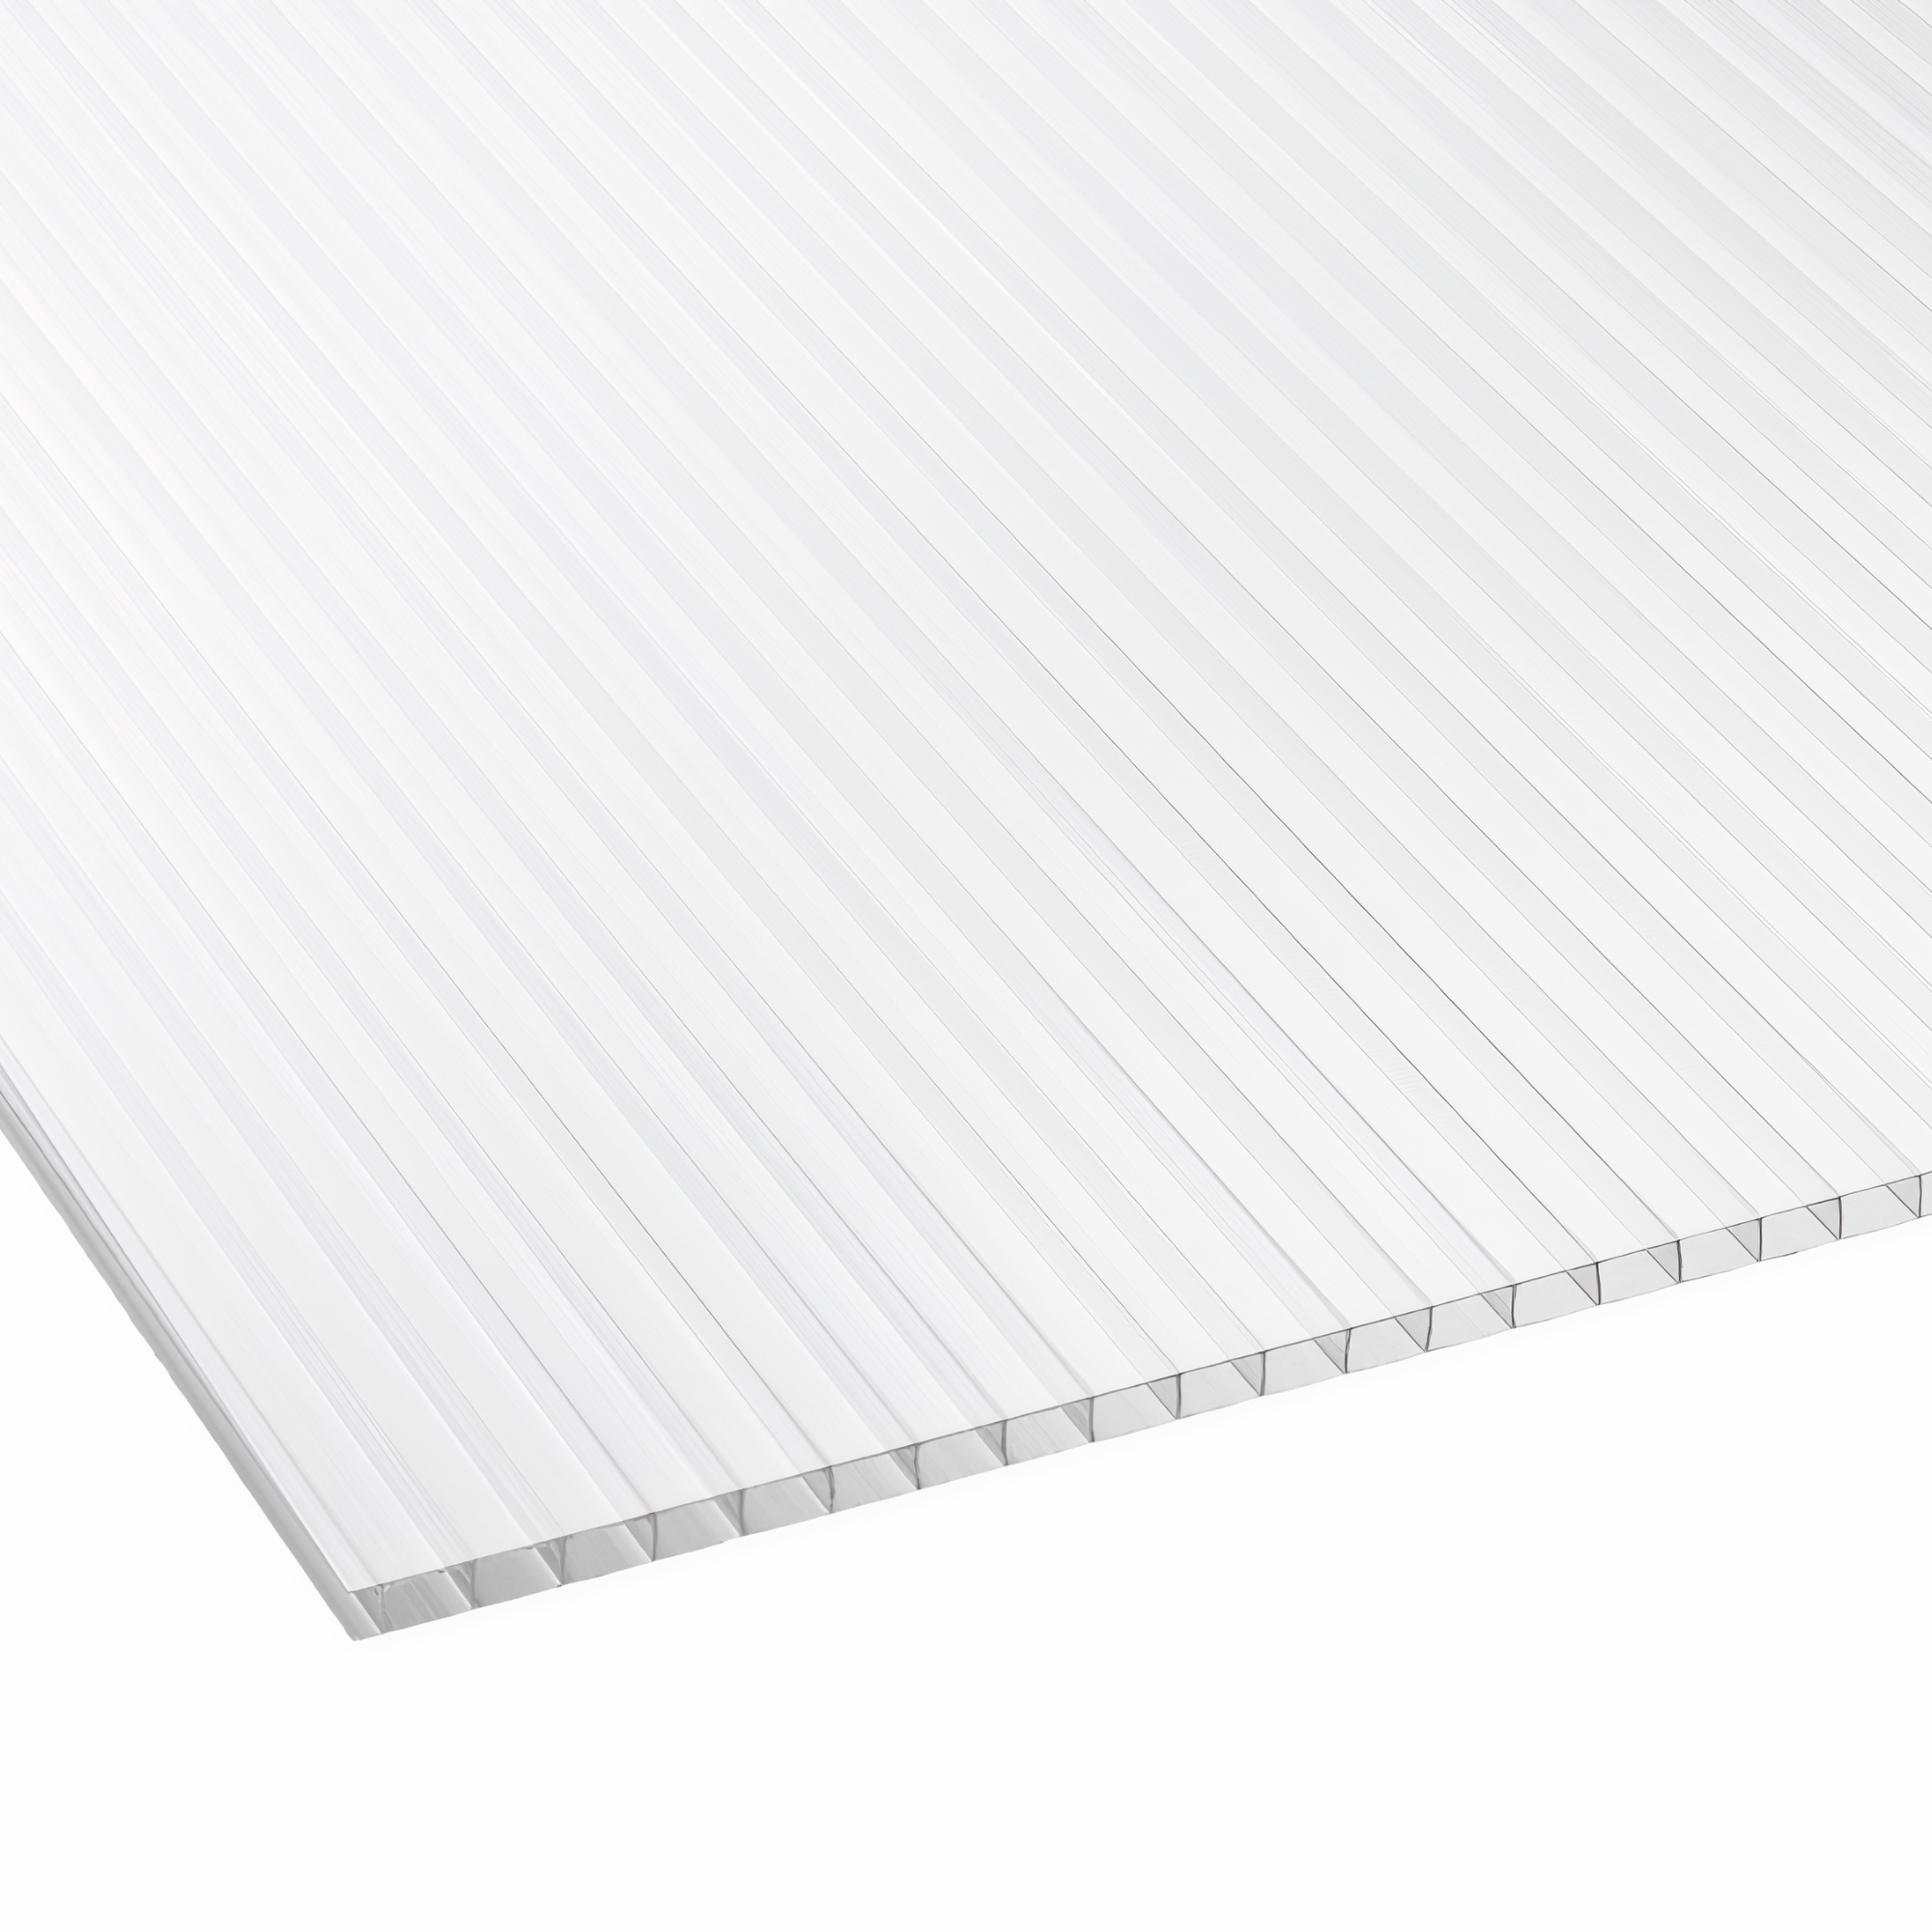 4mm Polycarbonate Sheets - 390mm x 402mm